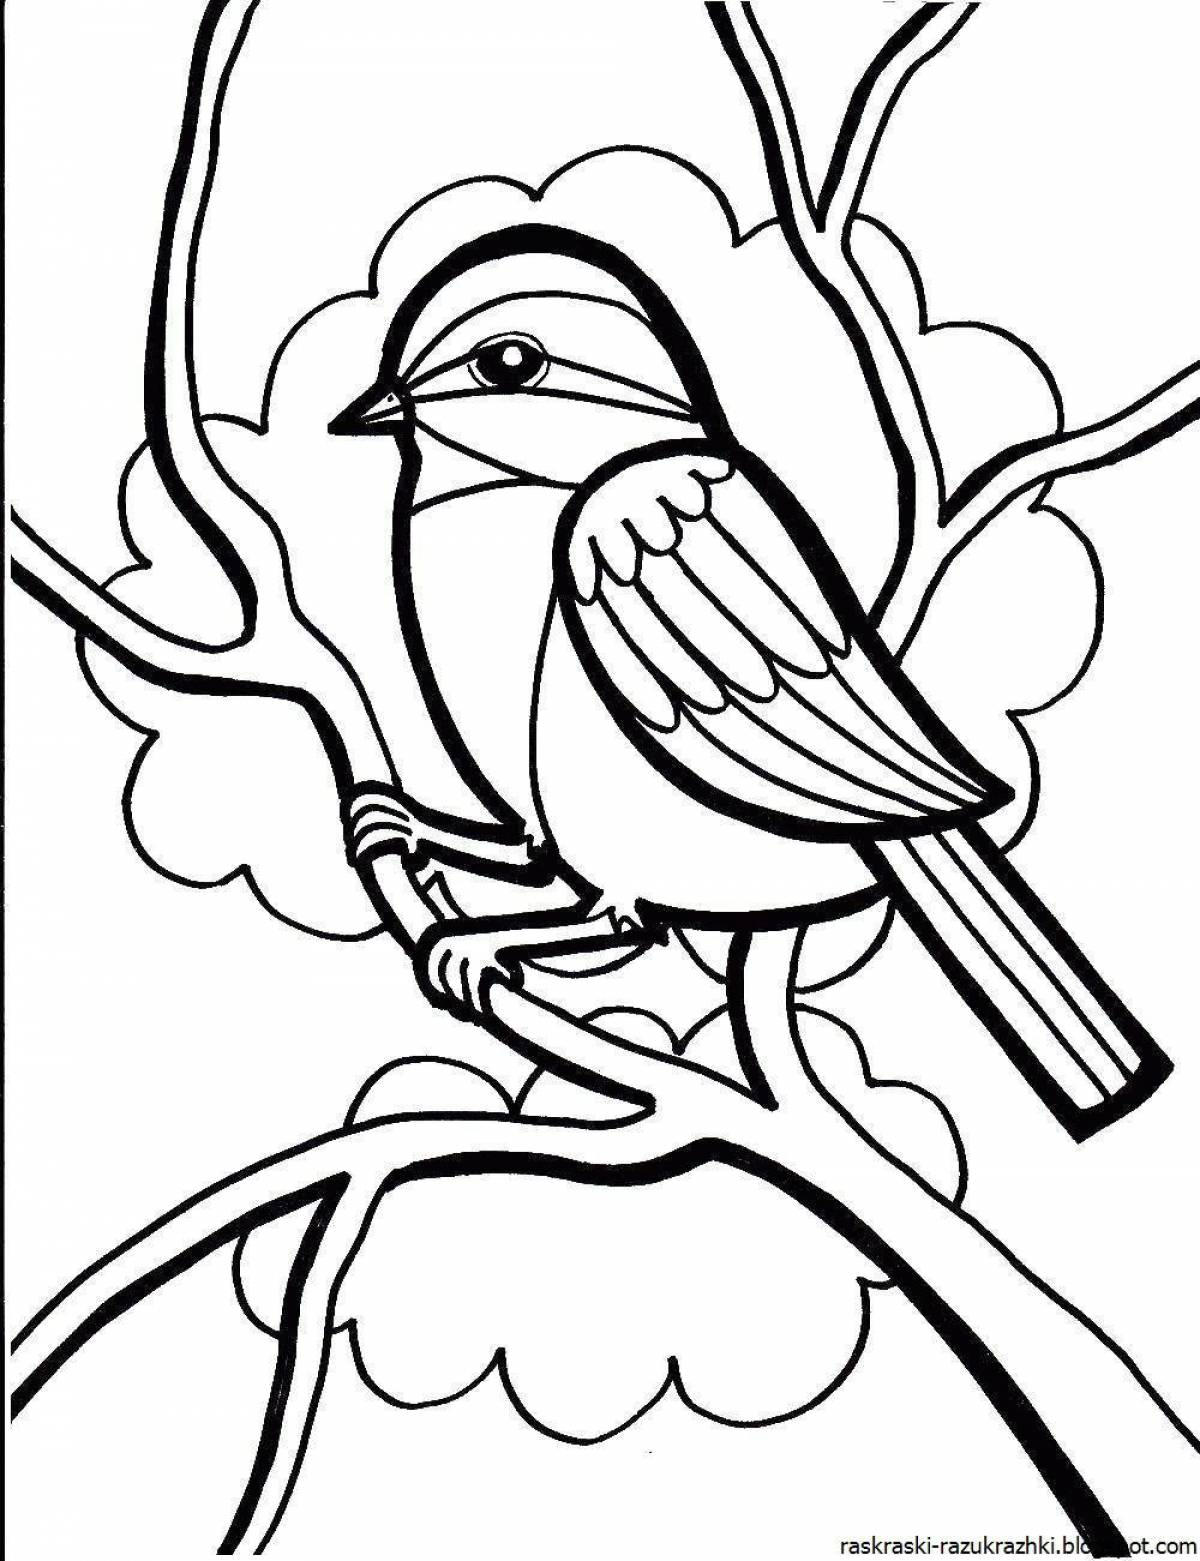 Coloring book dazzling bird for children 6-7 years old